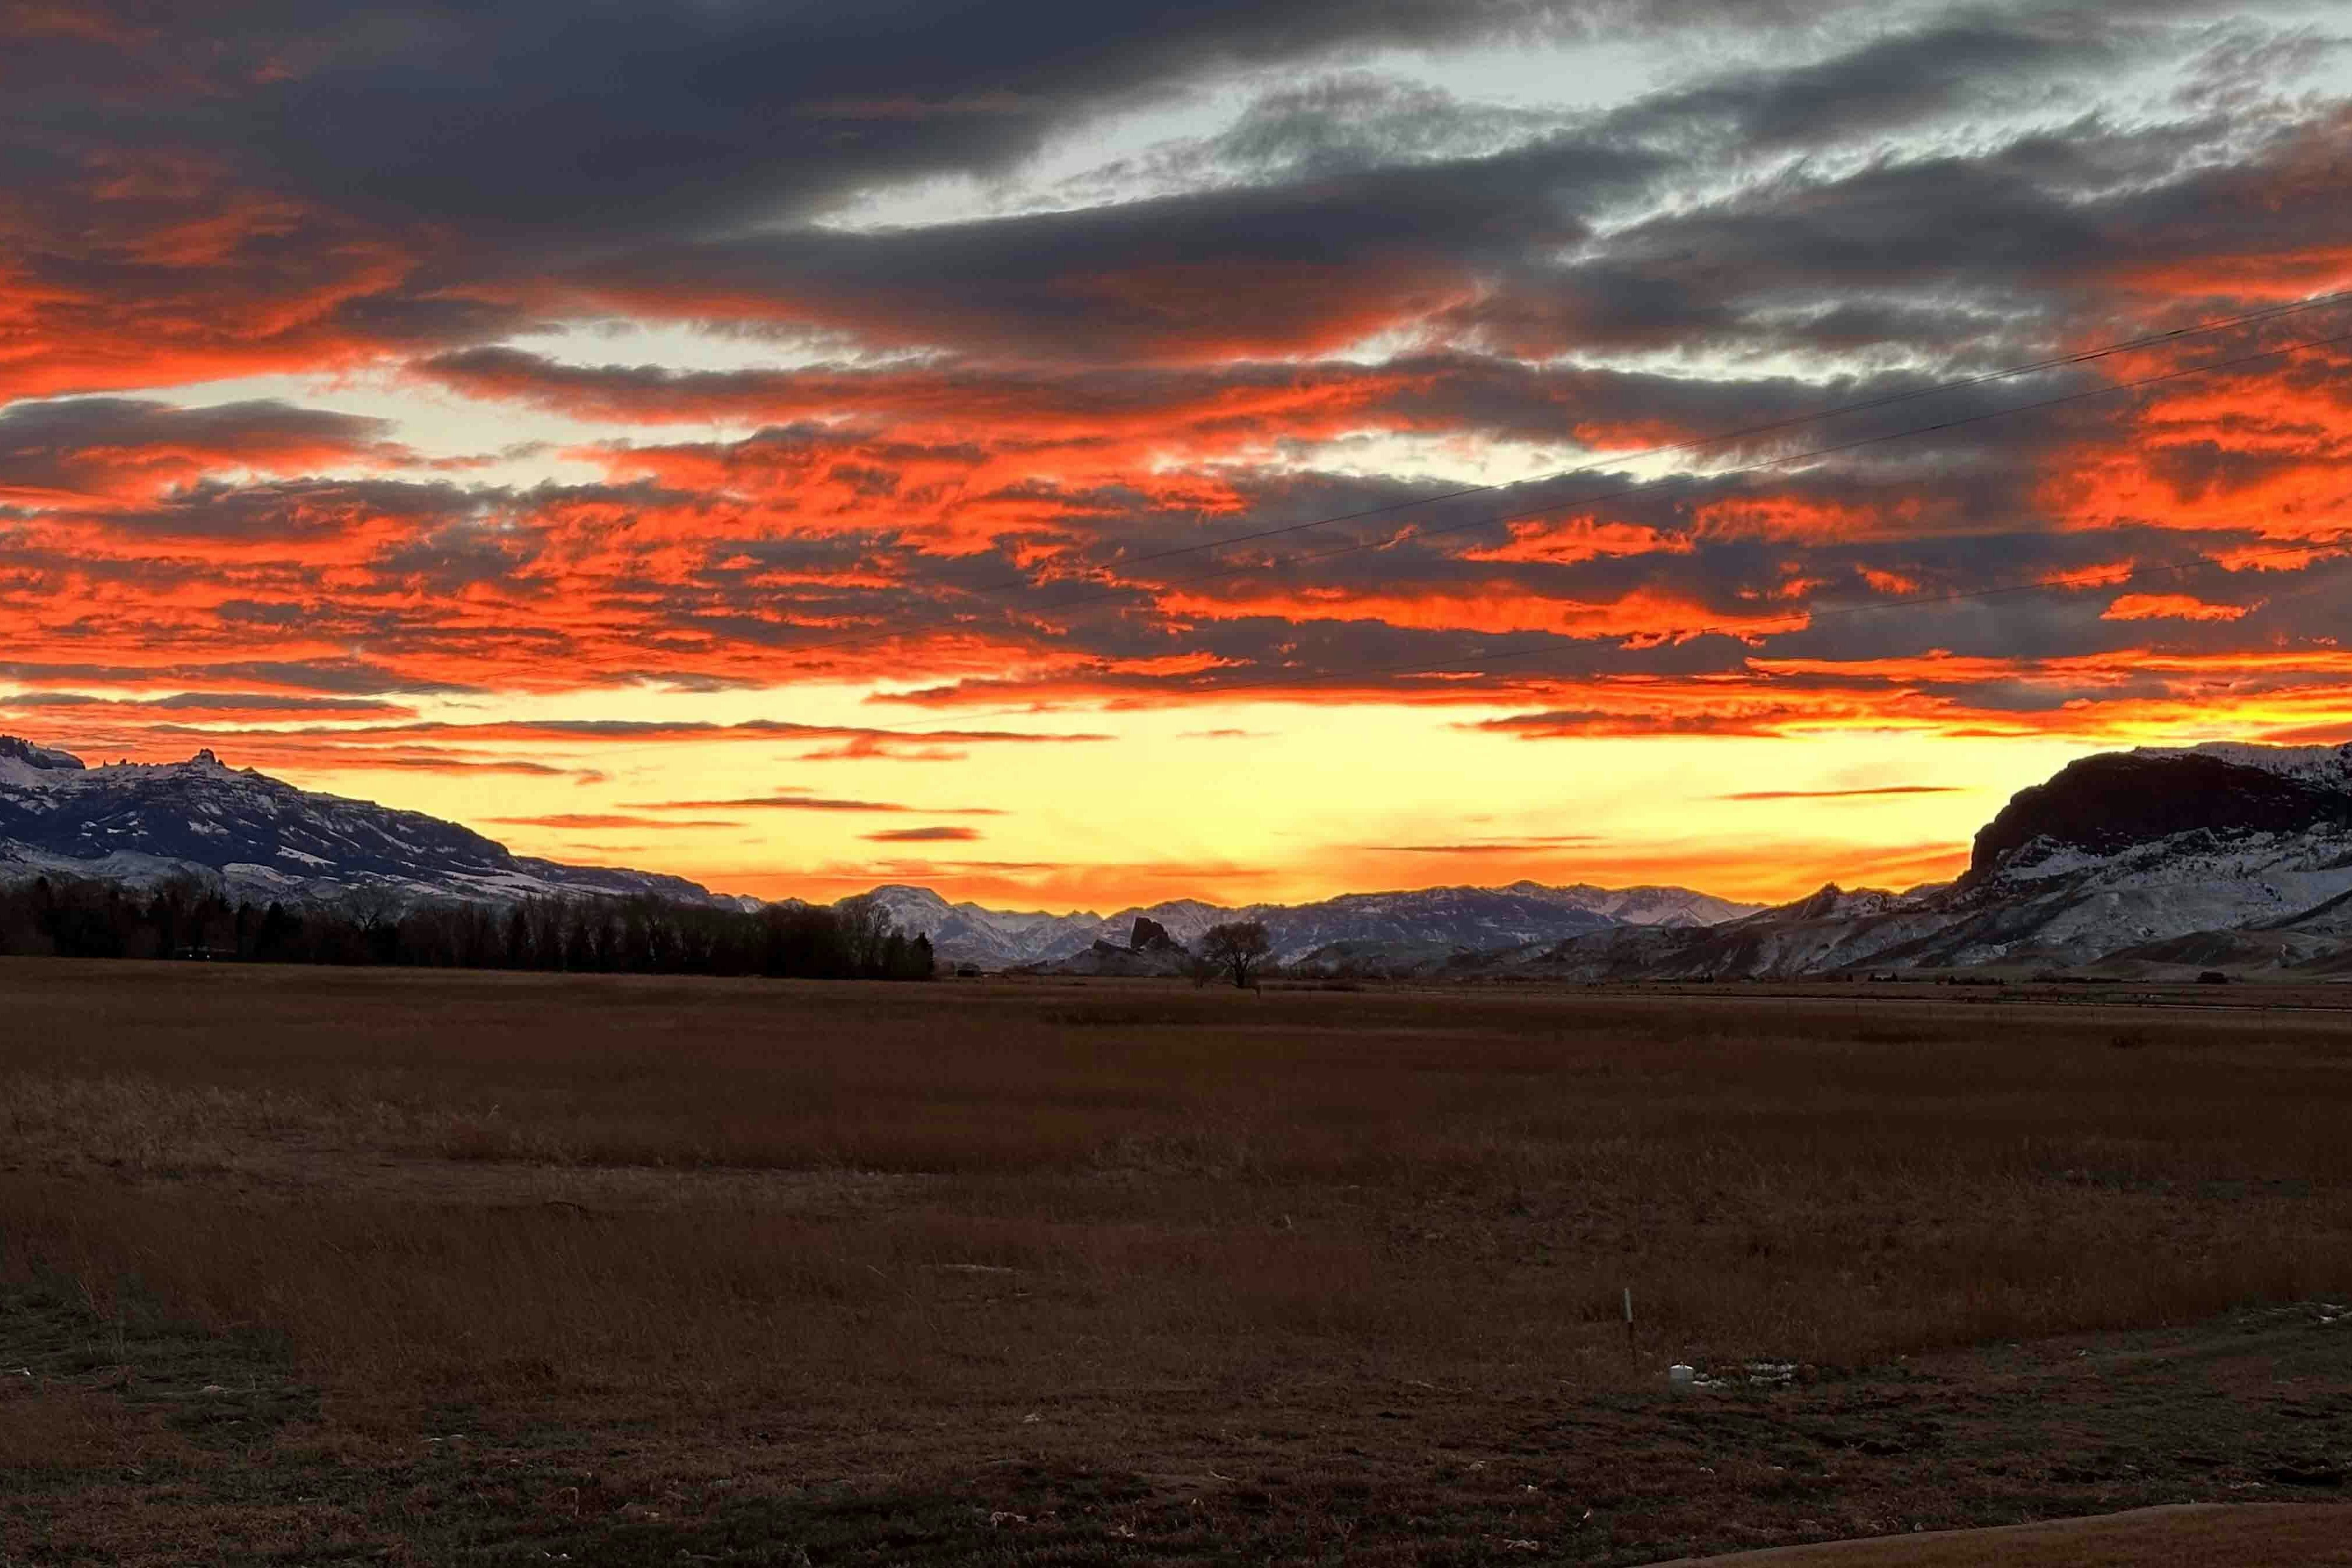 Last sunset of the year from the South Fork of the Shoshone River valley.